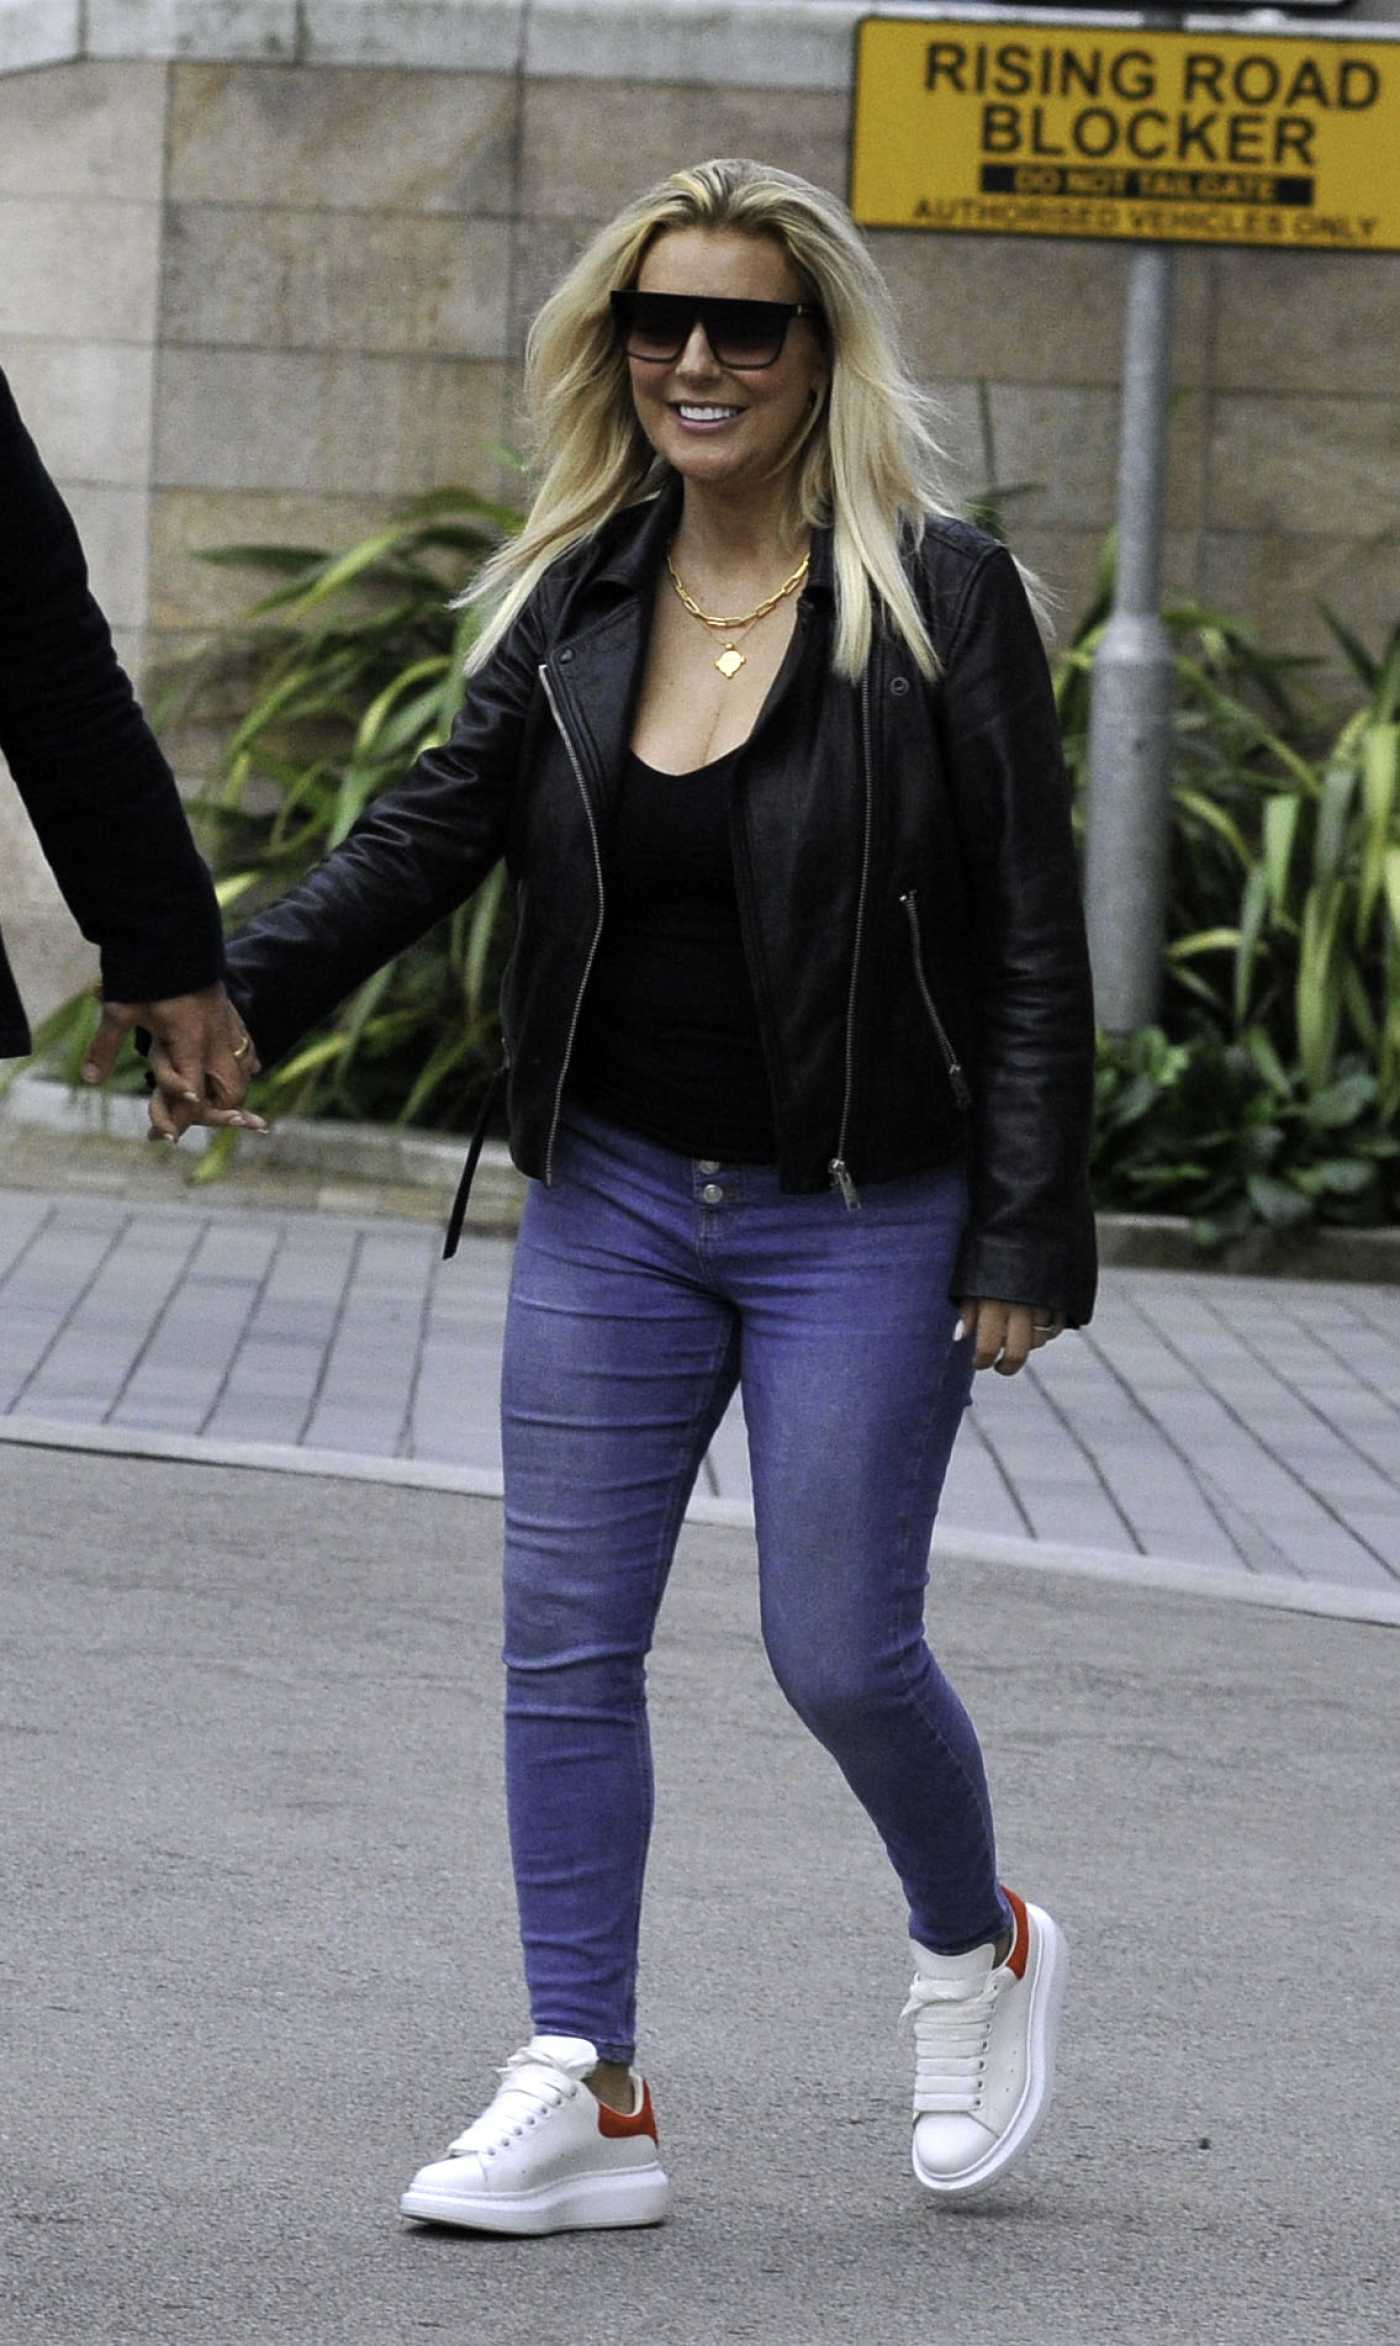 Sheridan Smith in a Black Leather Jacket Was Seen Out in Manchester 08/24/2020